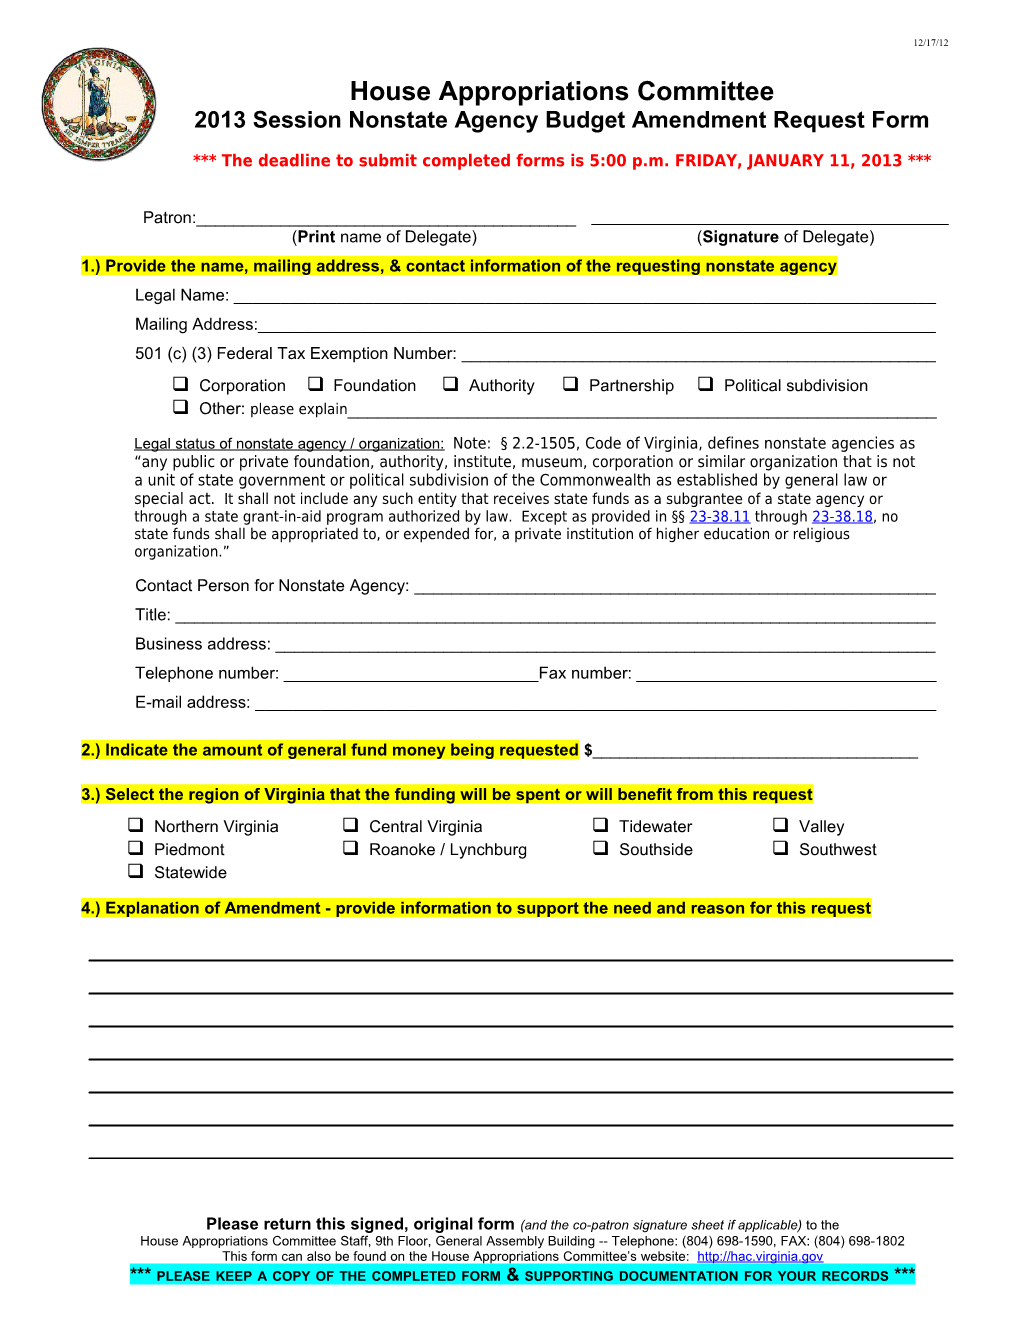 2013 Session Nonstate Agency Budget Amendment Request Form